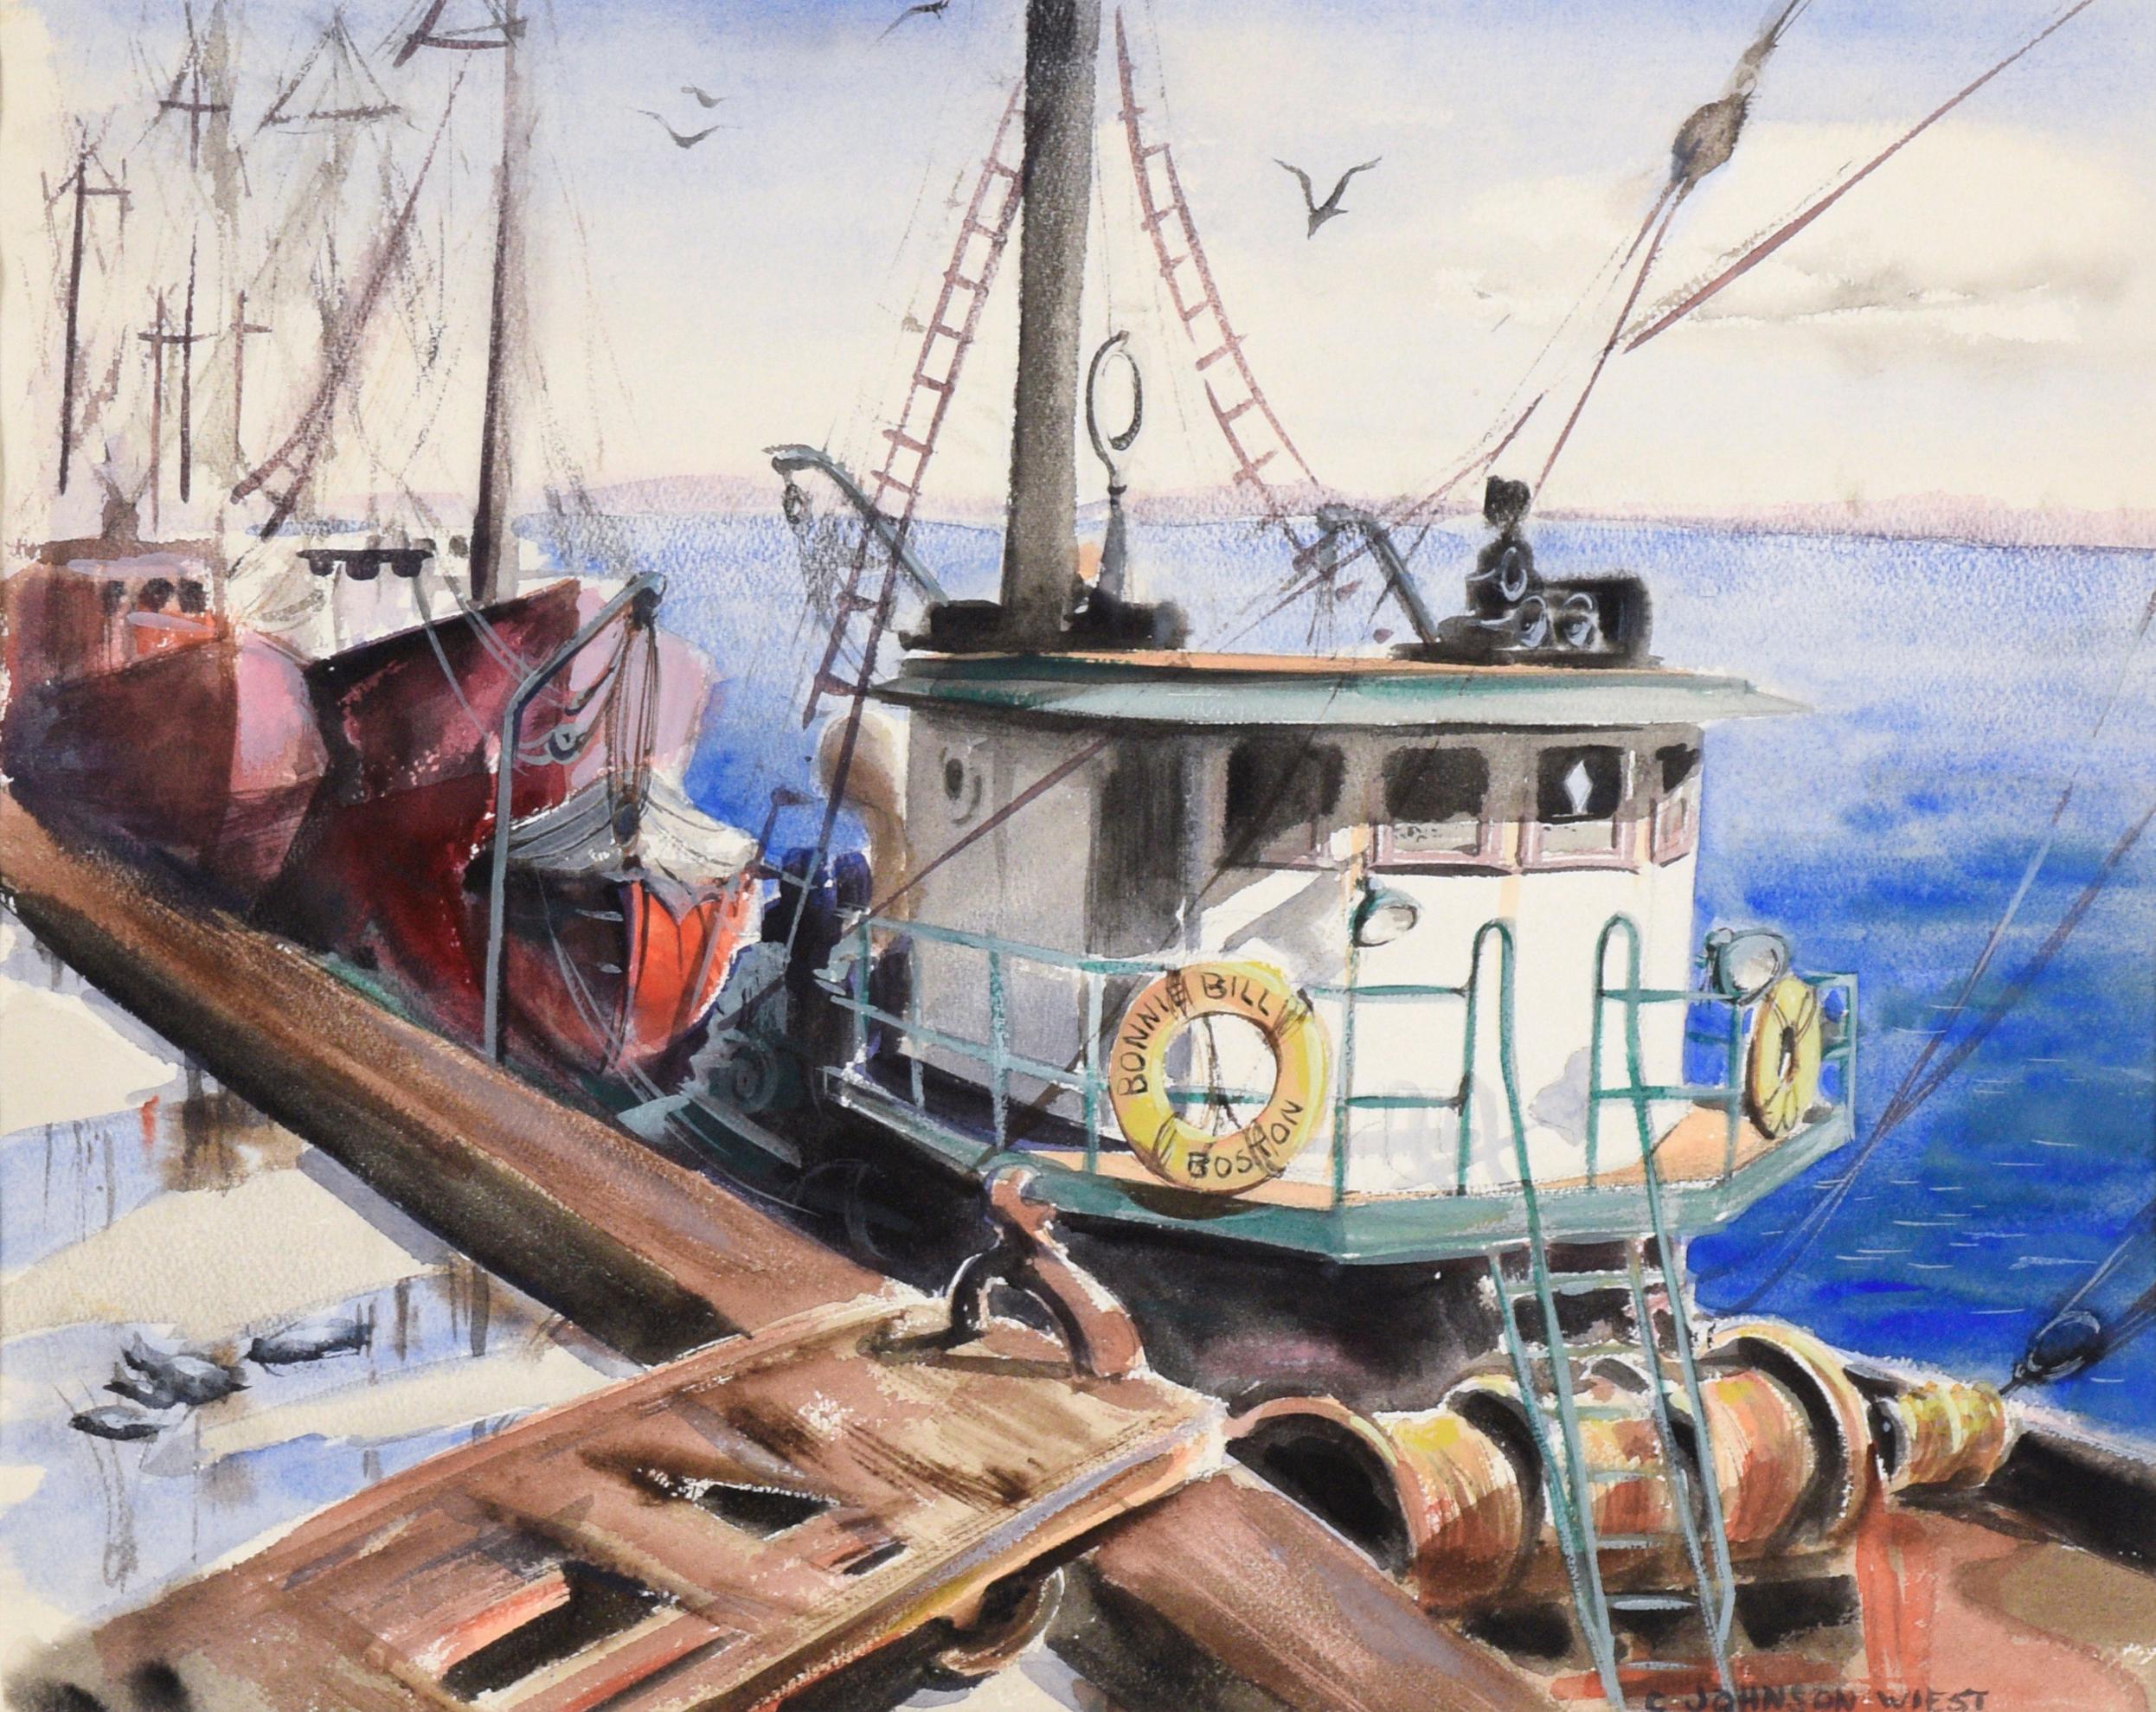 Bonnie Bill  - Tugboat at the Dock in Boston - Seascape in Watercolor on Paper  - Art by Claire Weist